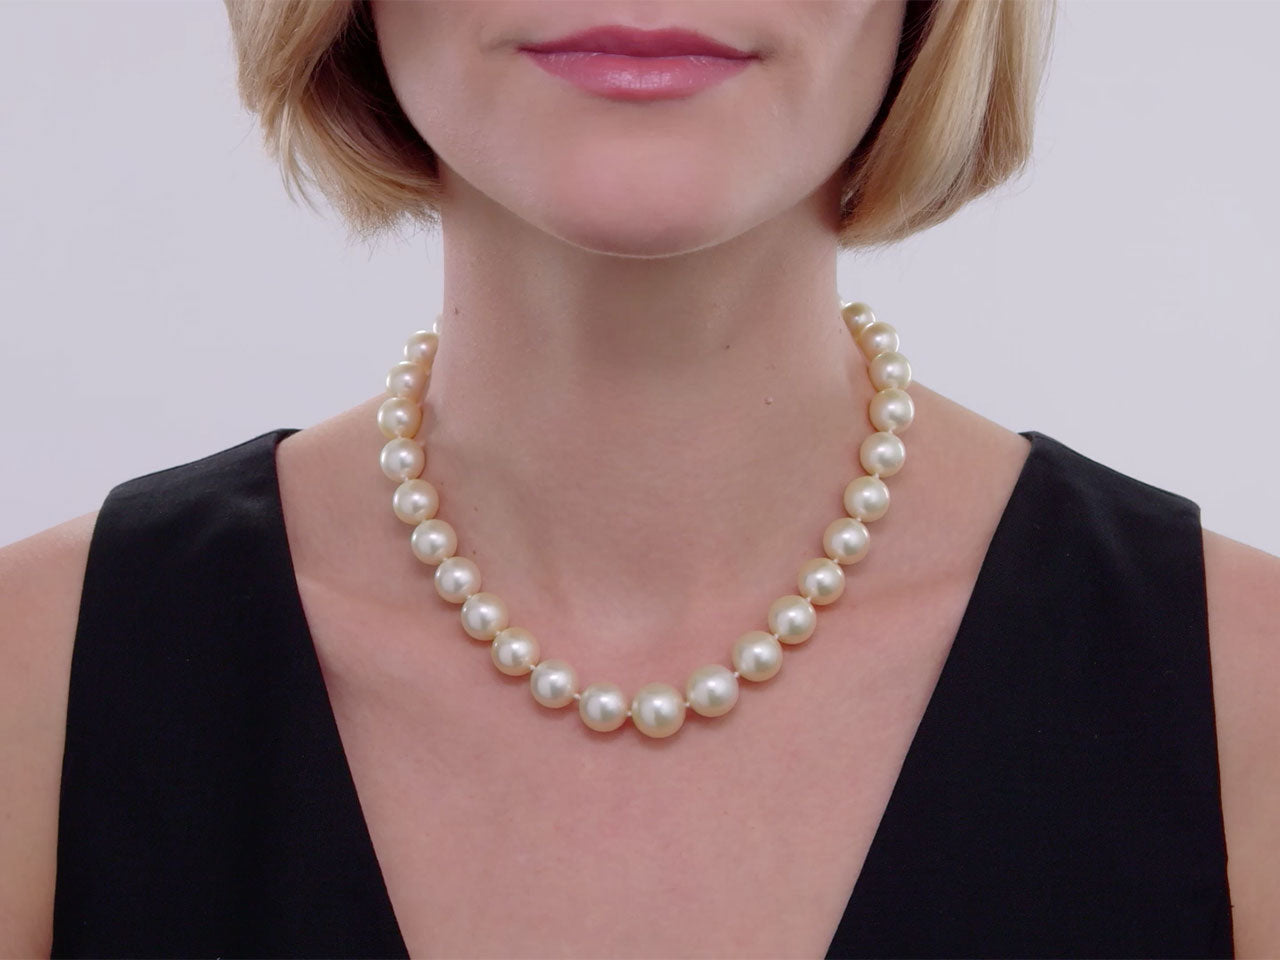 South Sea Pearl Necklace with Diamond Clasp in 18K